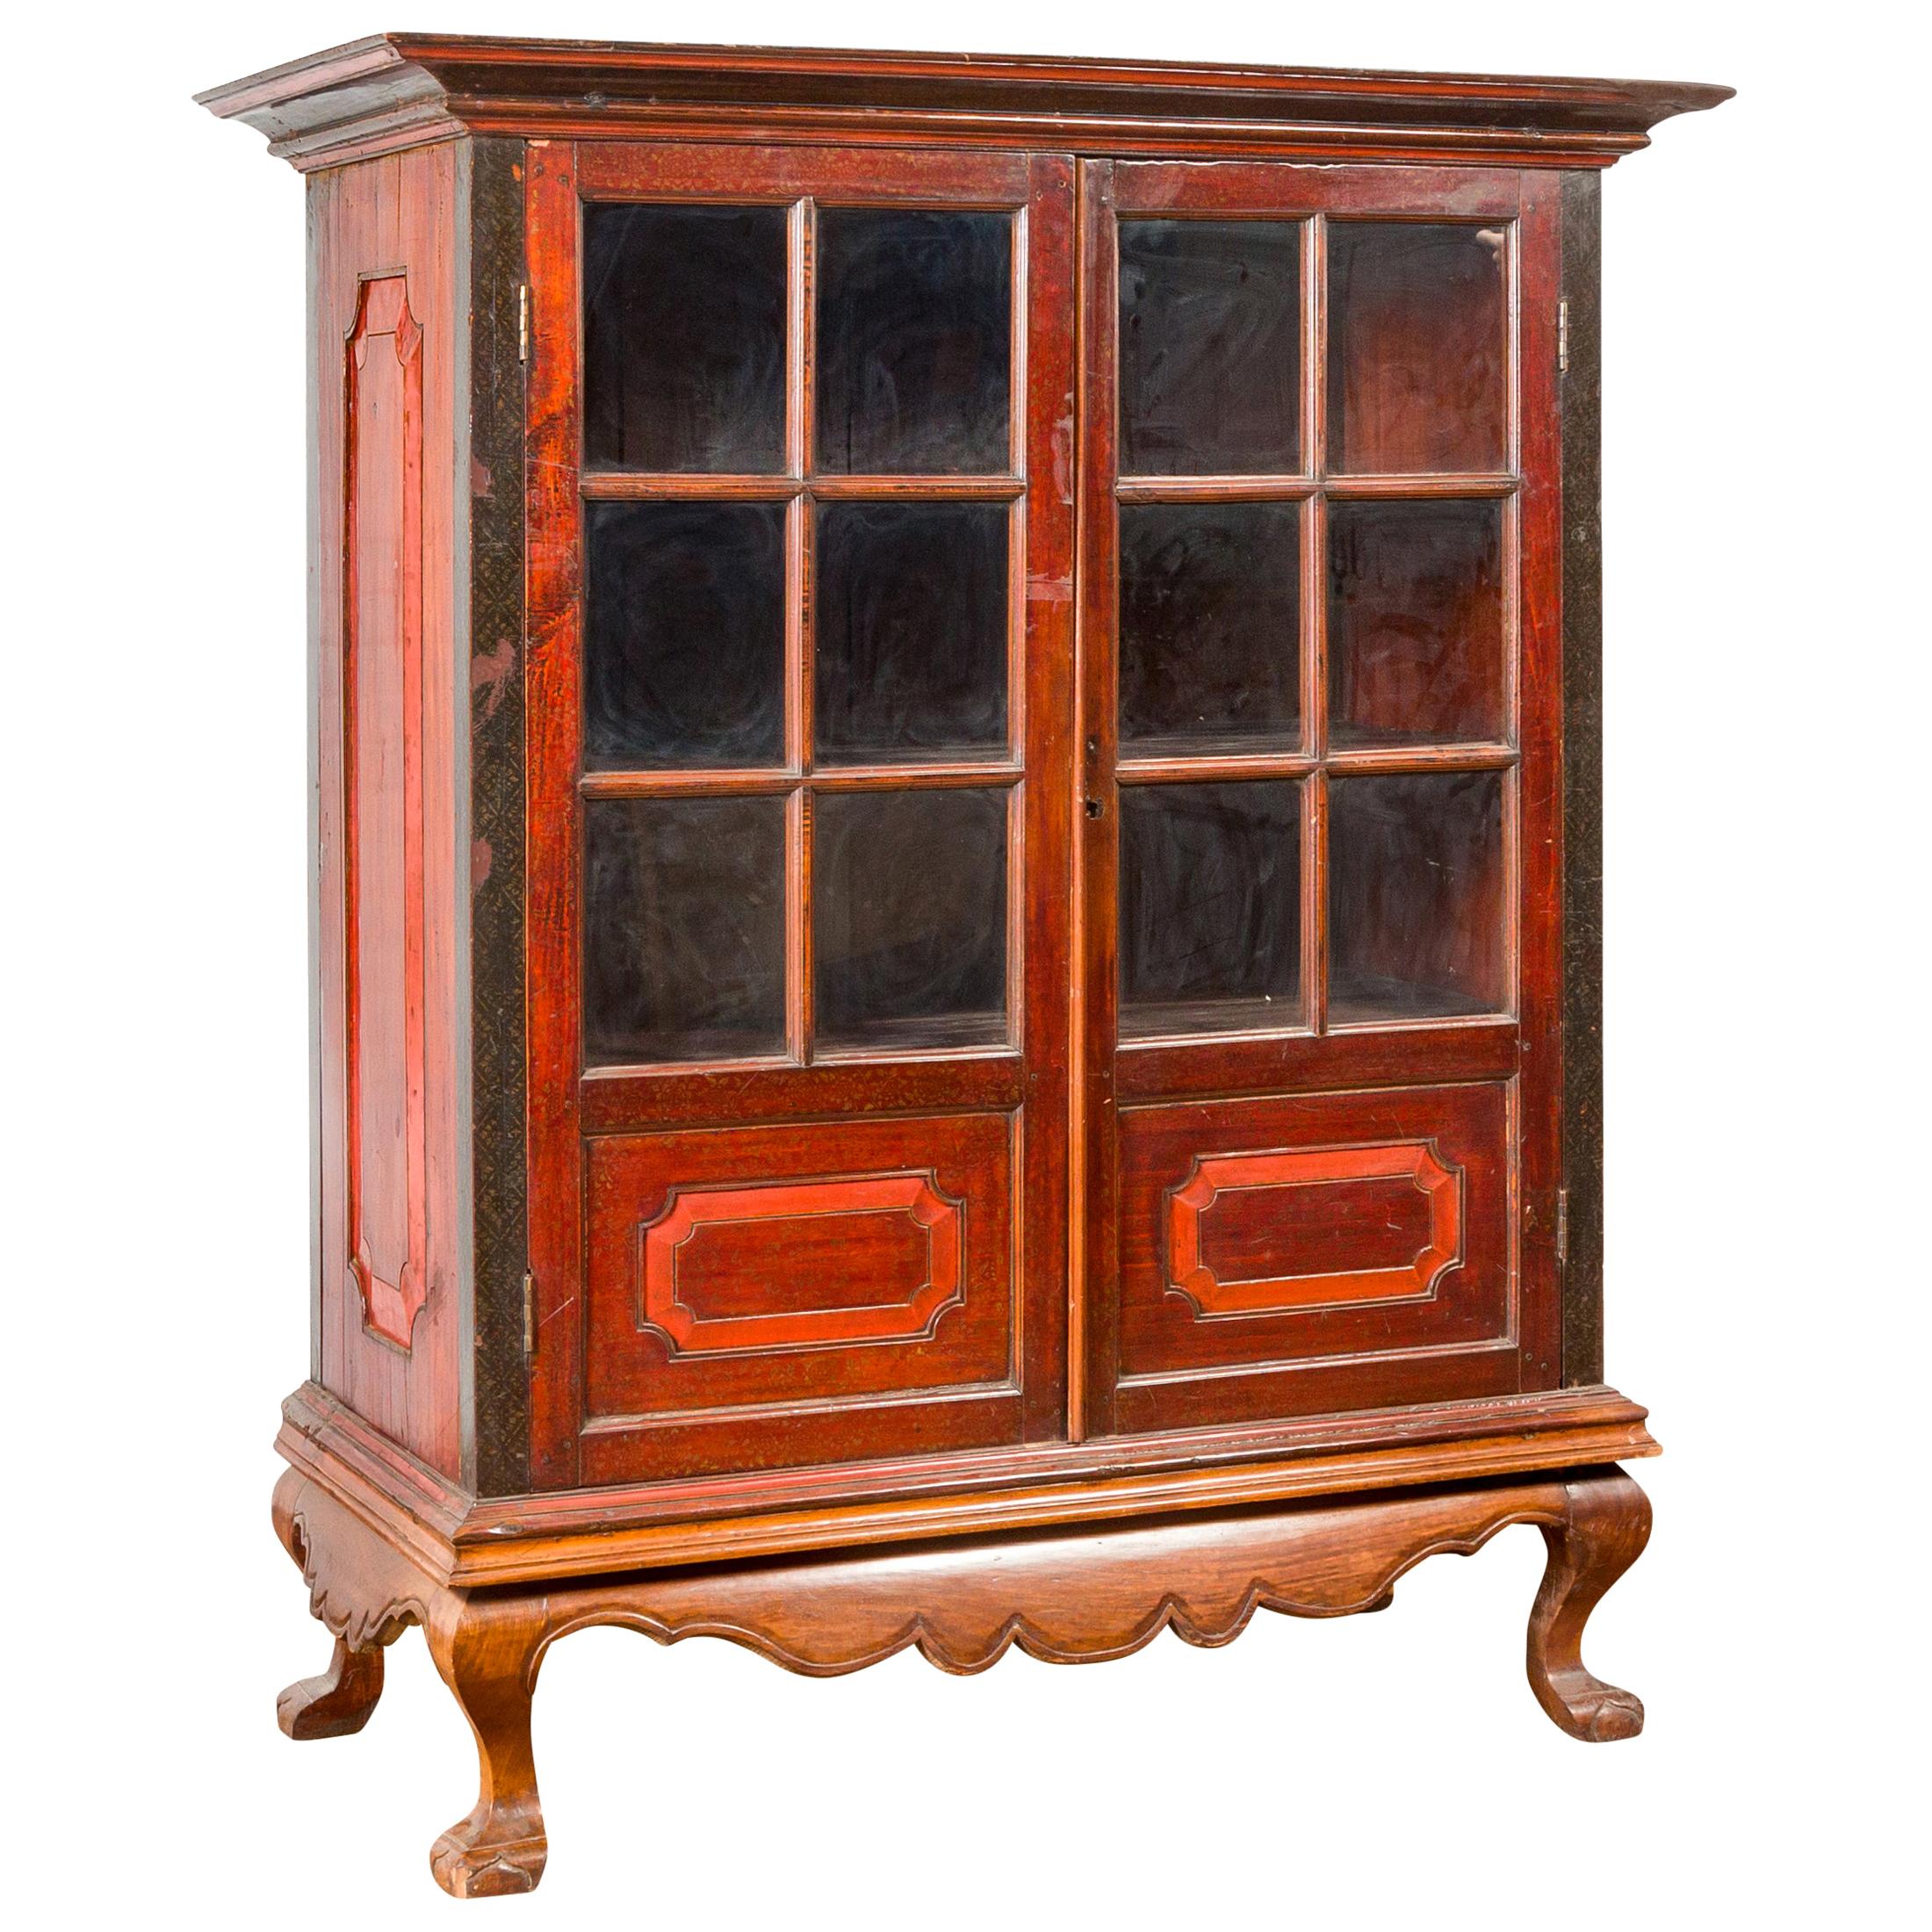 Dutch Colonial Antique Lacquered Wood Cabinet with Glass Doors and Cabriole Legs